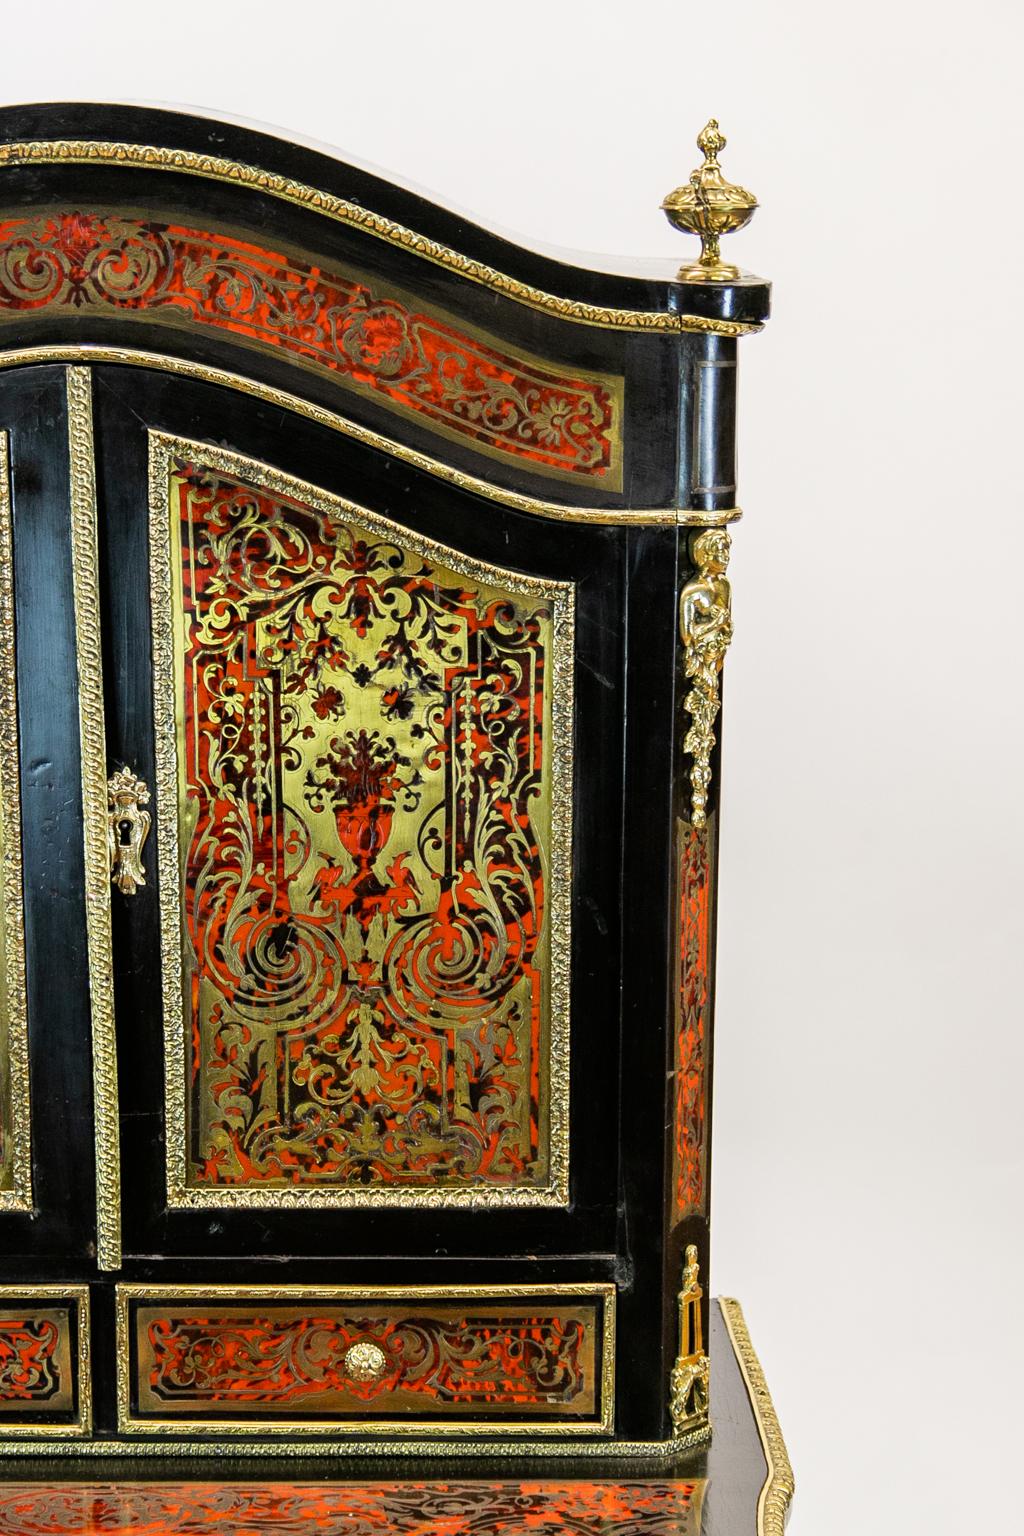 This French Boulle escritoire has profuse brass inlays with arabesques and brass ornamental mounts throughout. The wooden background is ebonized. The drawer pulls out to reveal a sliding gold tooled leather writing surface with storage beneath. The